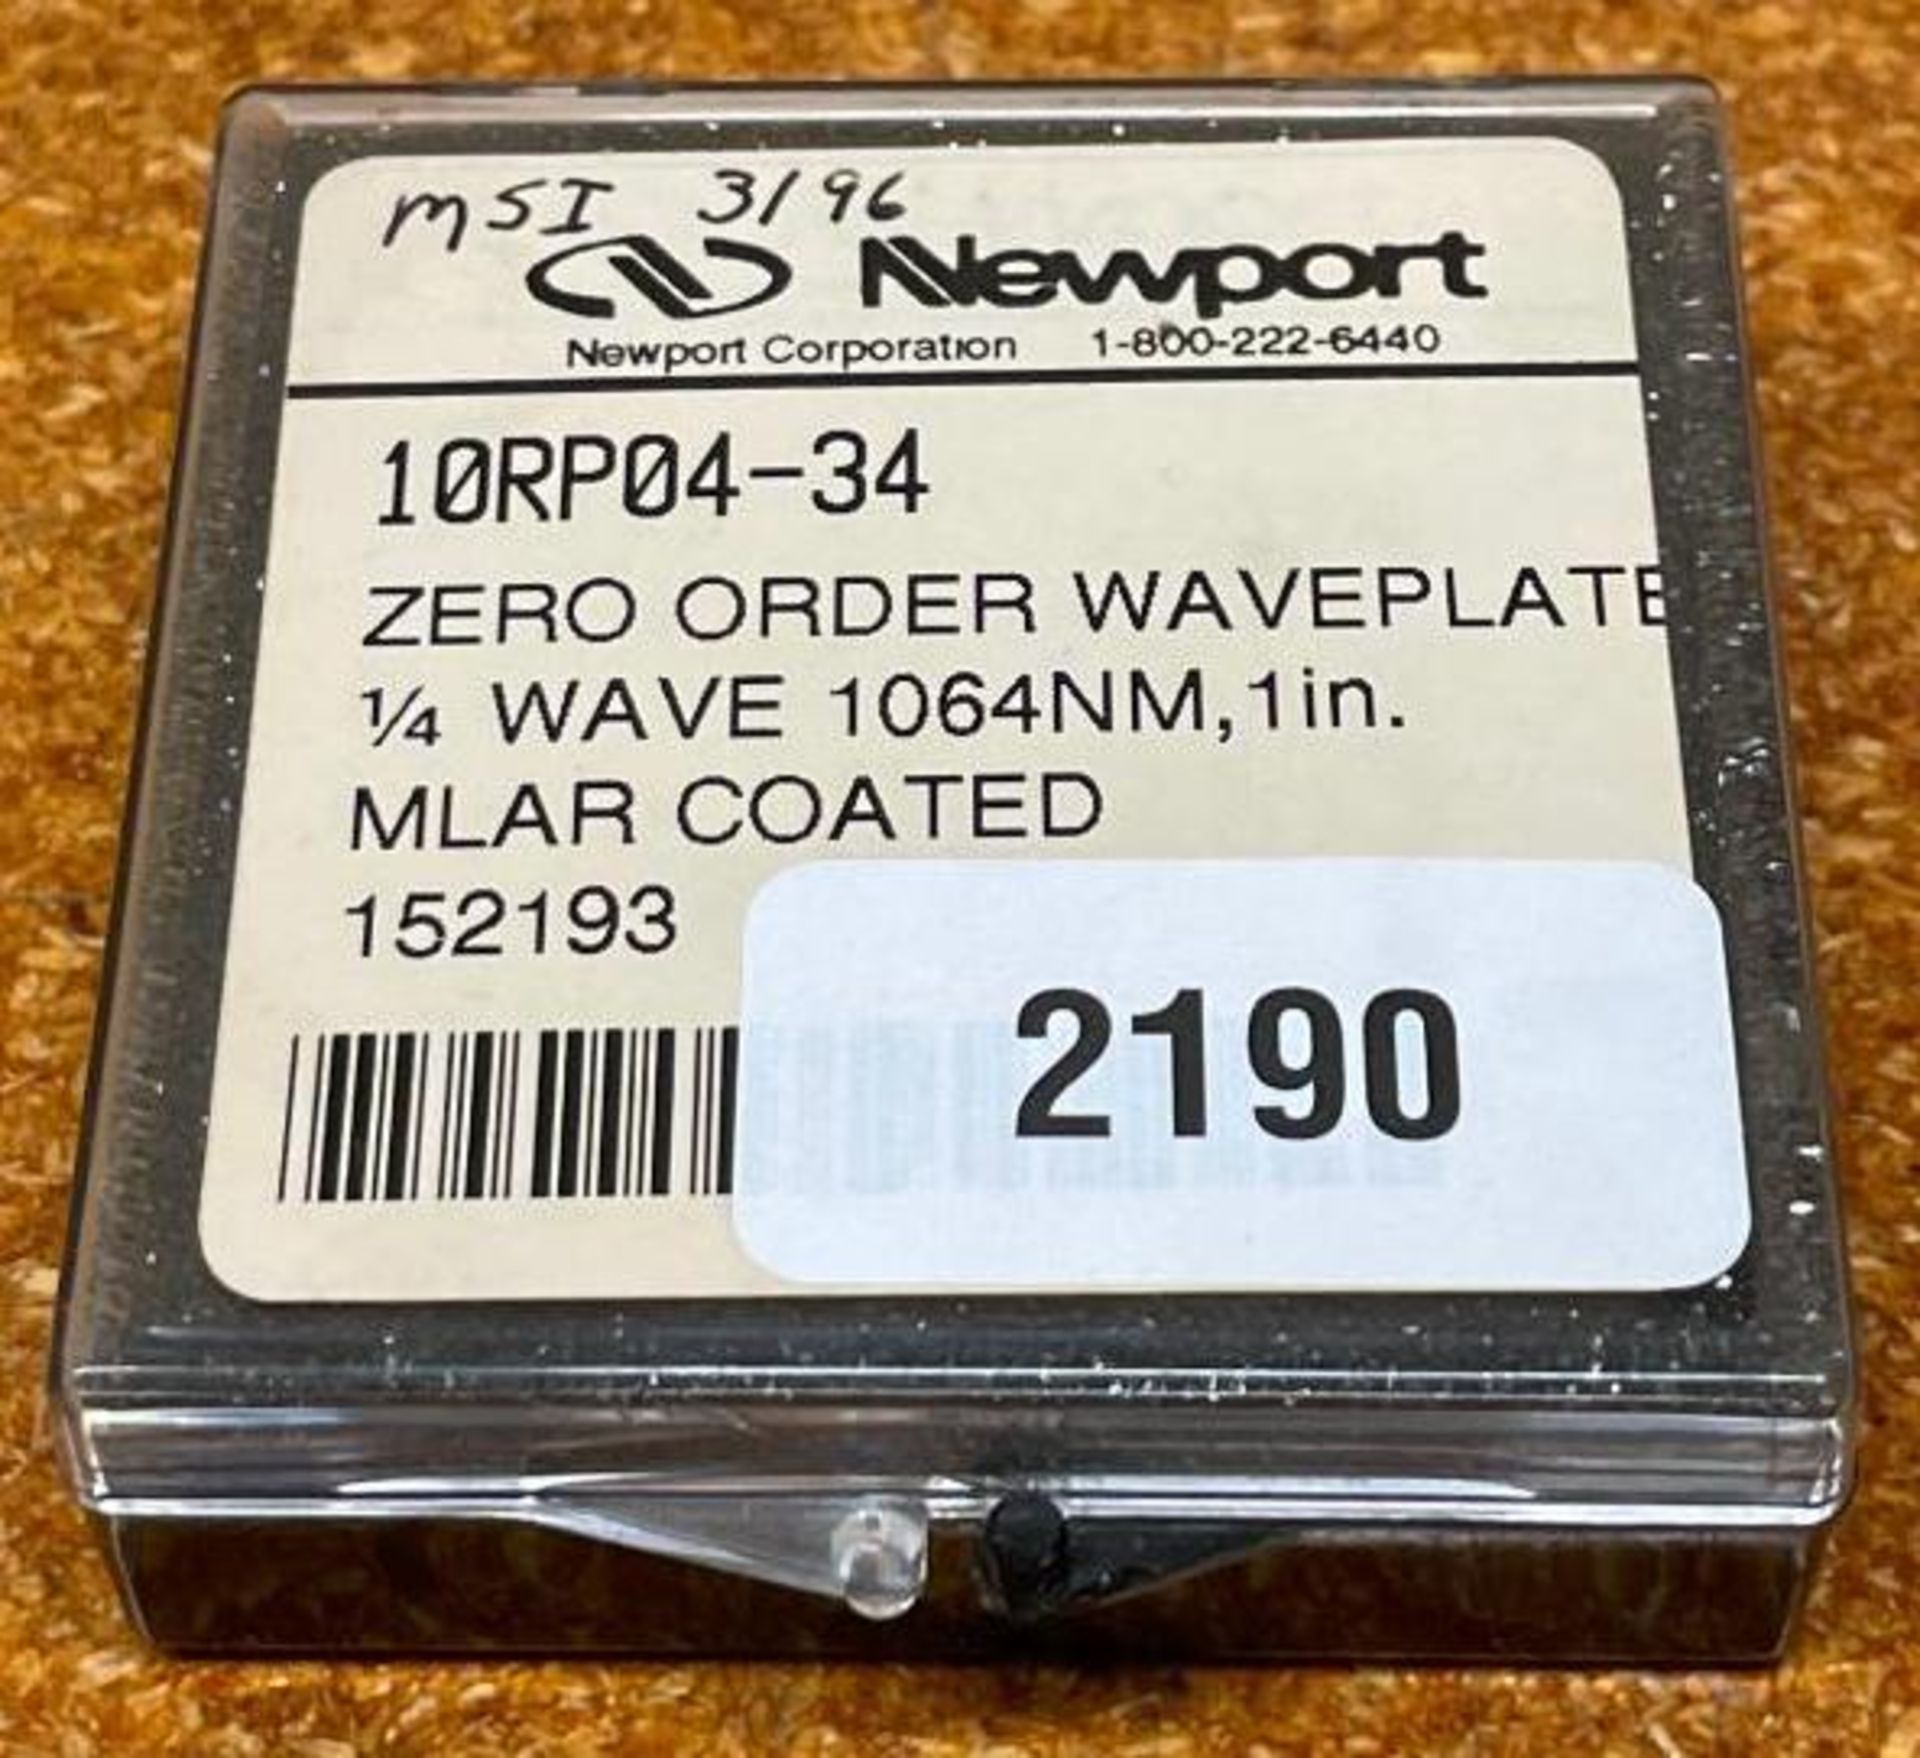 ZERO ORDER 1/4 WAVEPLATE BRAND/MODEL: NEWPORT 10RP04-34 INFORMATION: 1064 nm, AR COATED QTY: 1 - Image 2 of 2